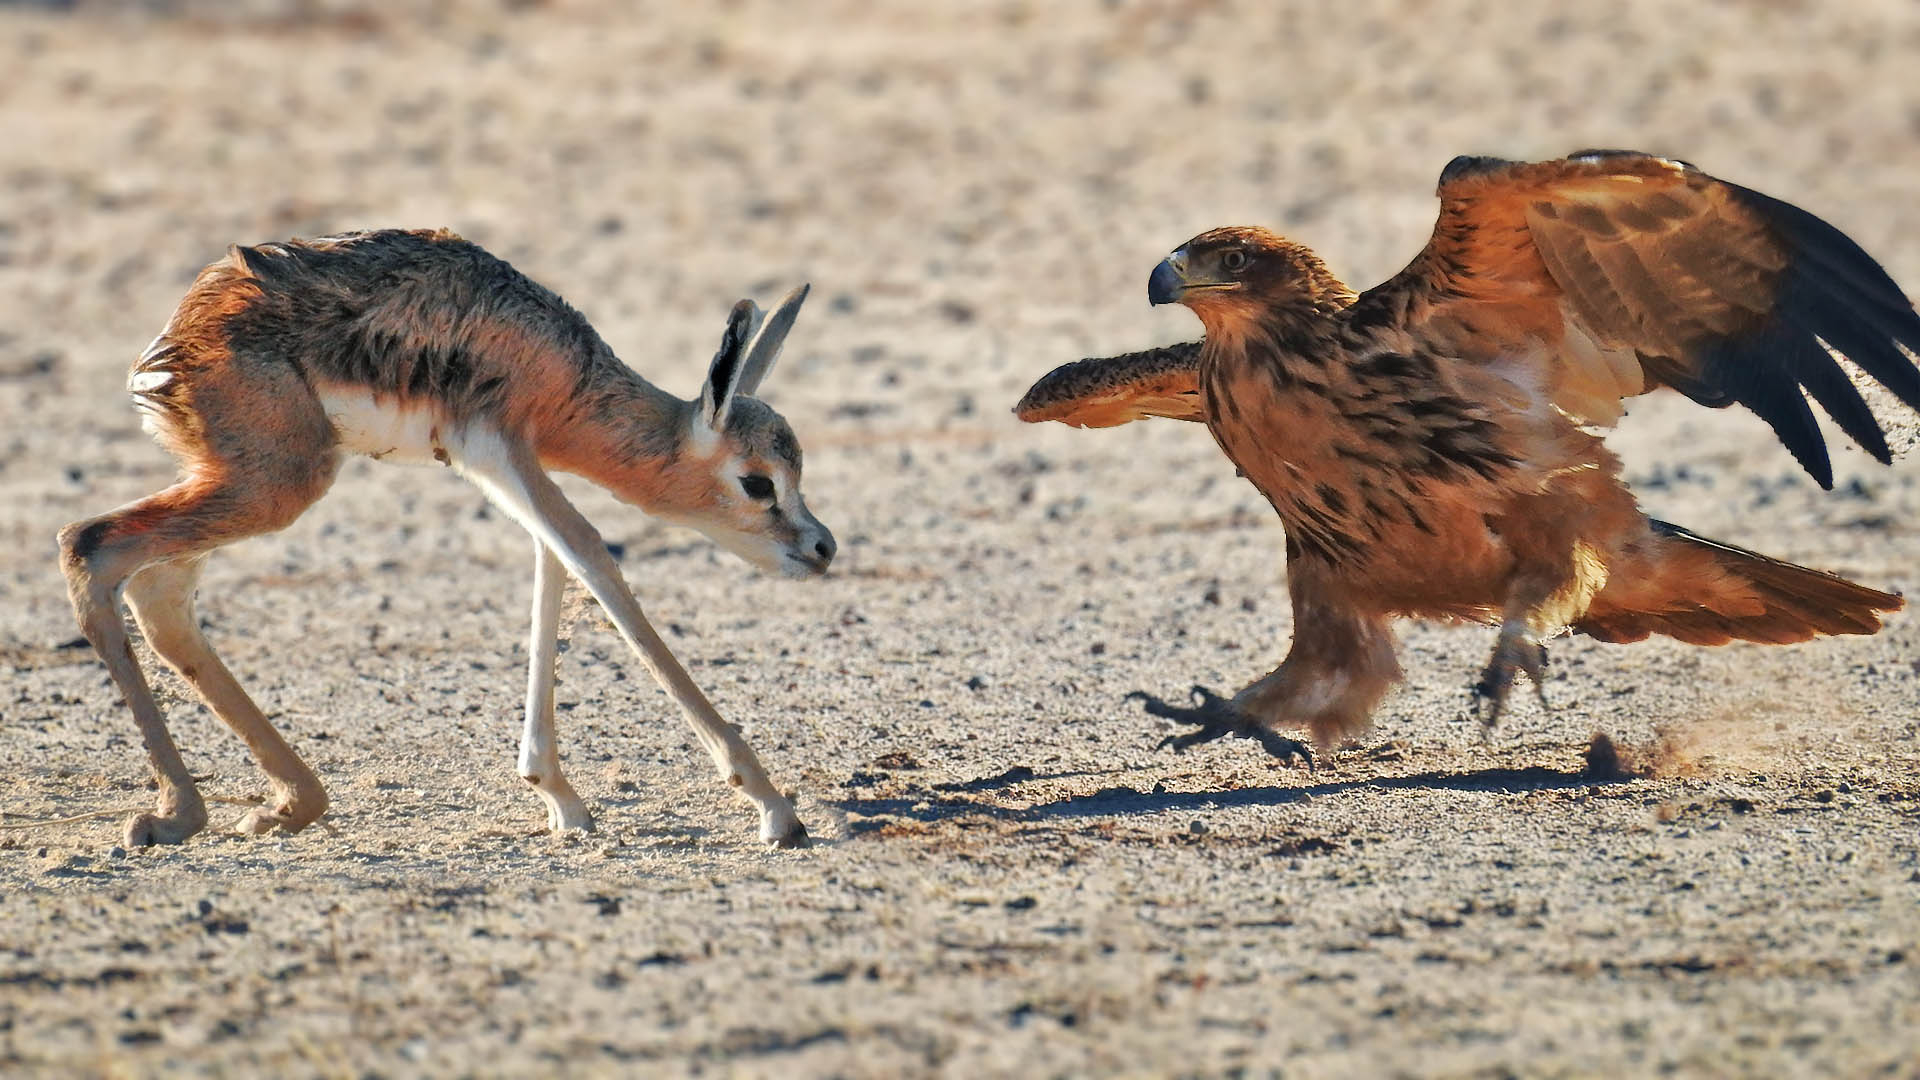 Abandoned Baby Buck gets Attacked by Eagles